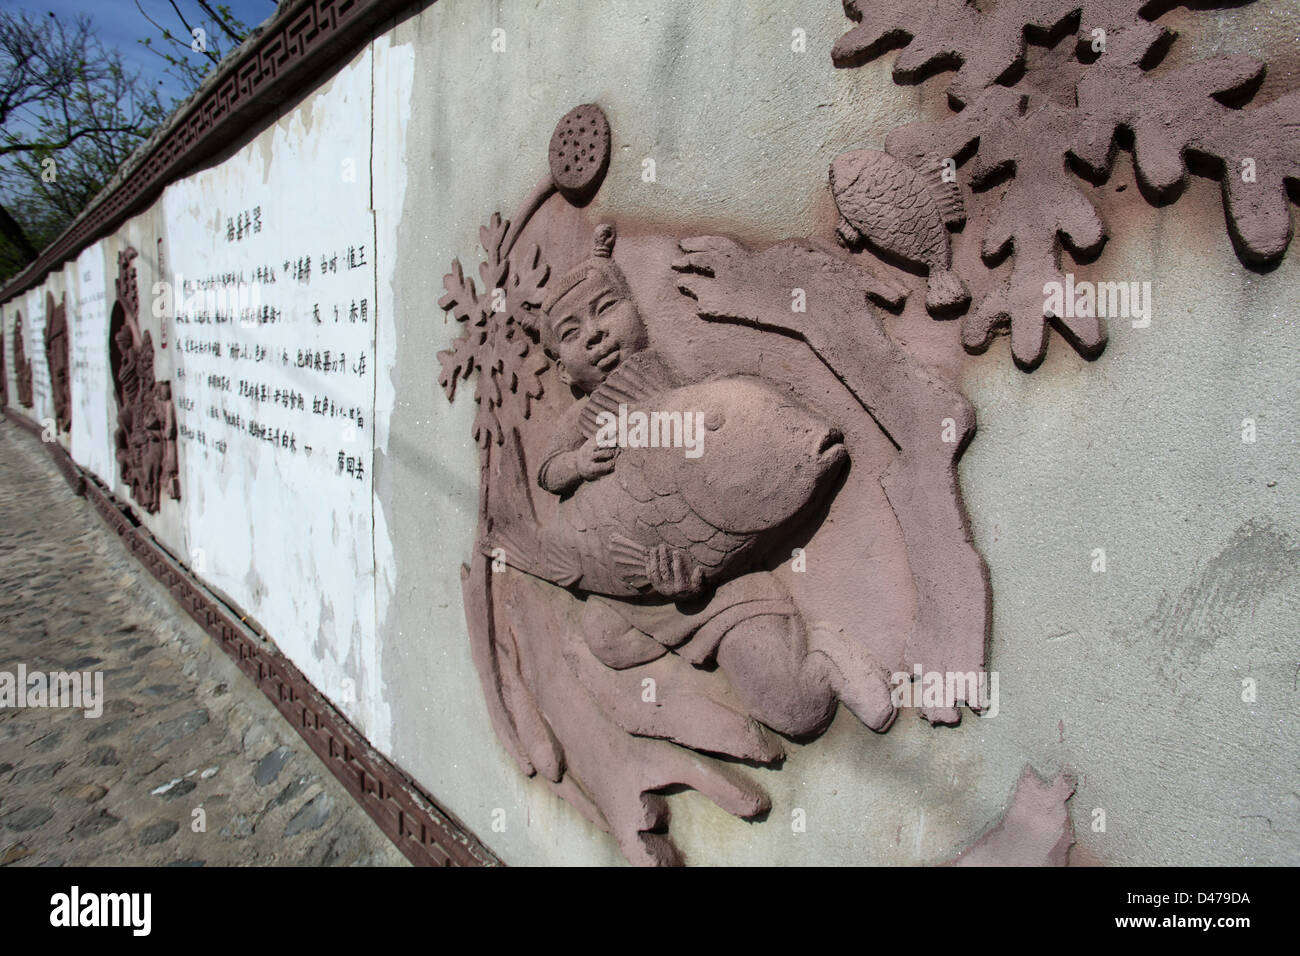 Confucius teachings on a wall, Xinying Village, Beijing Provence, China, Asia. Stock Photo